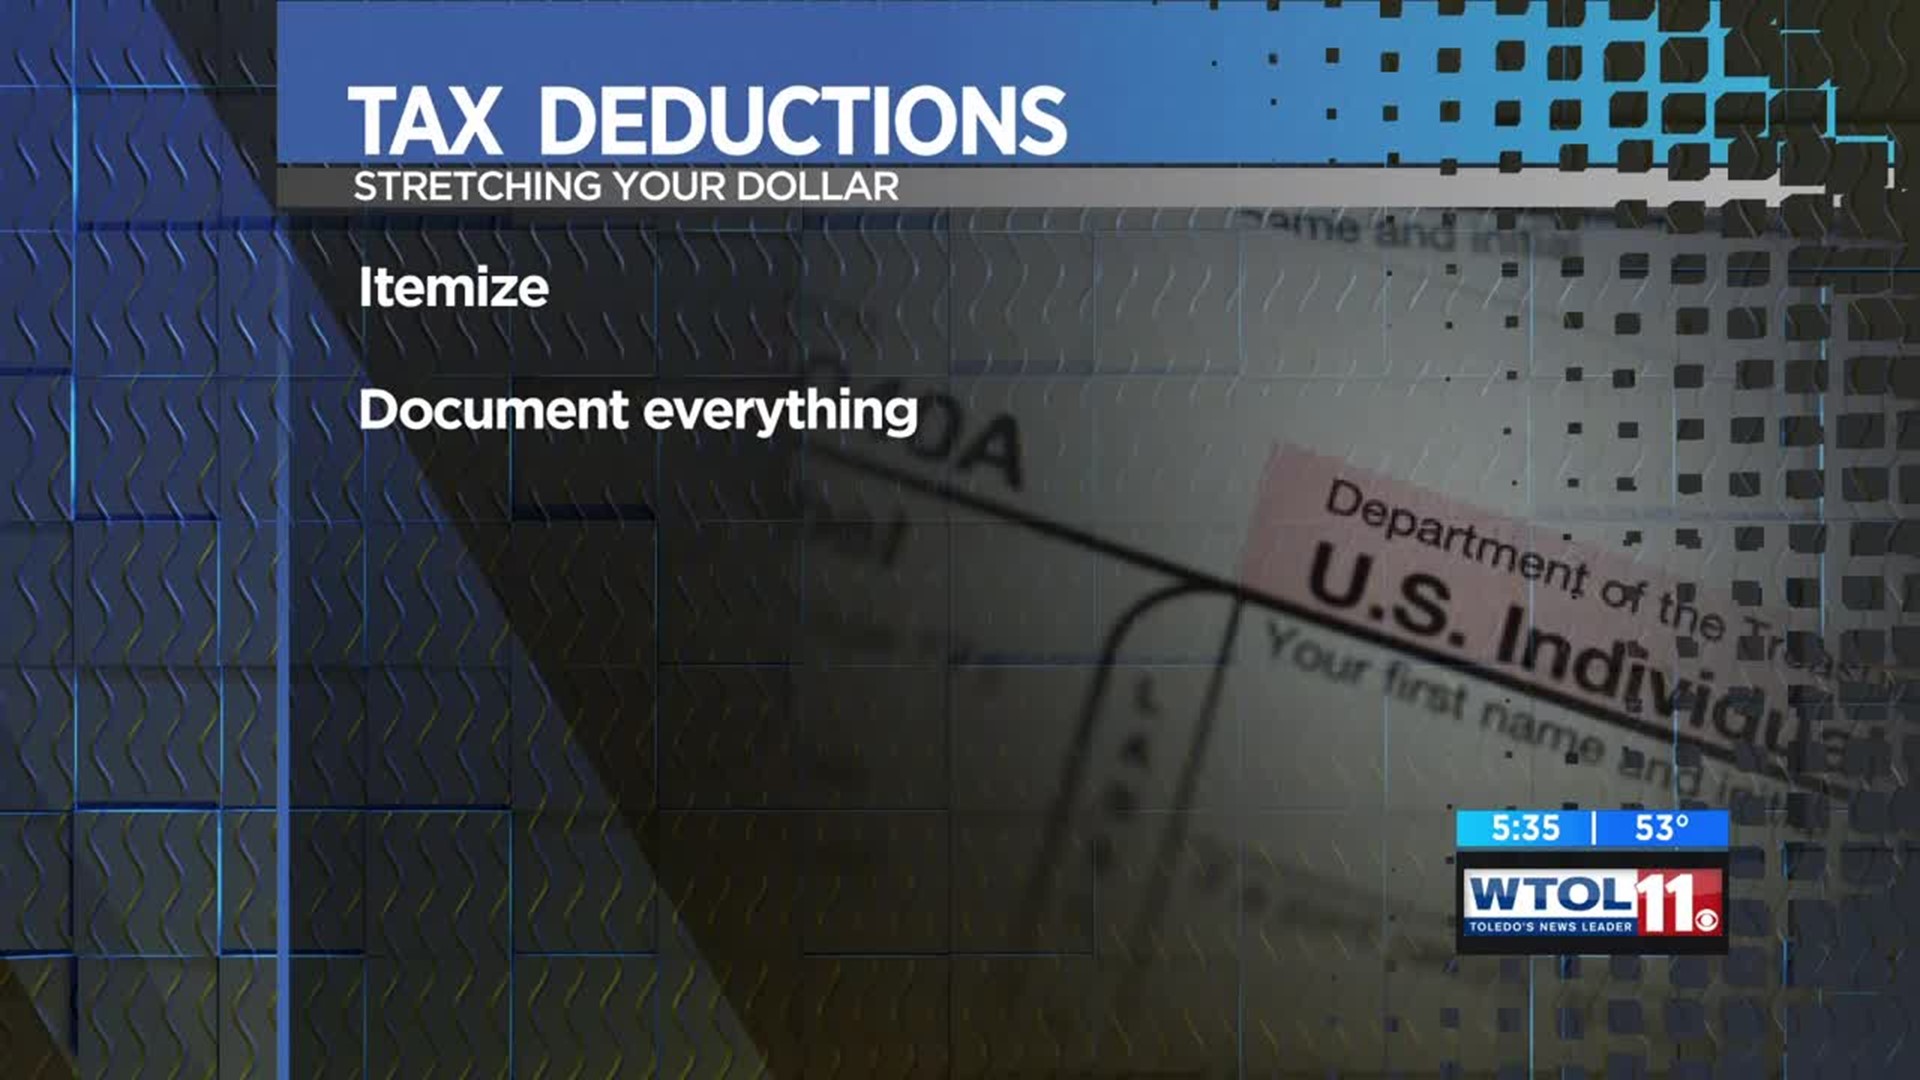 Stretching Your Dollar: Tax Deductions